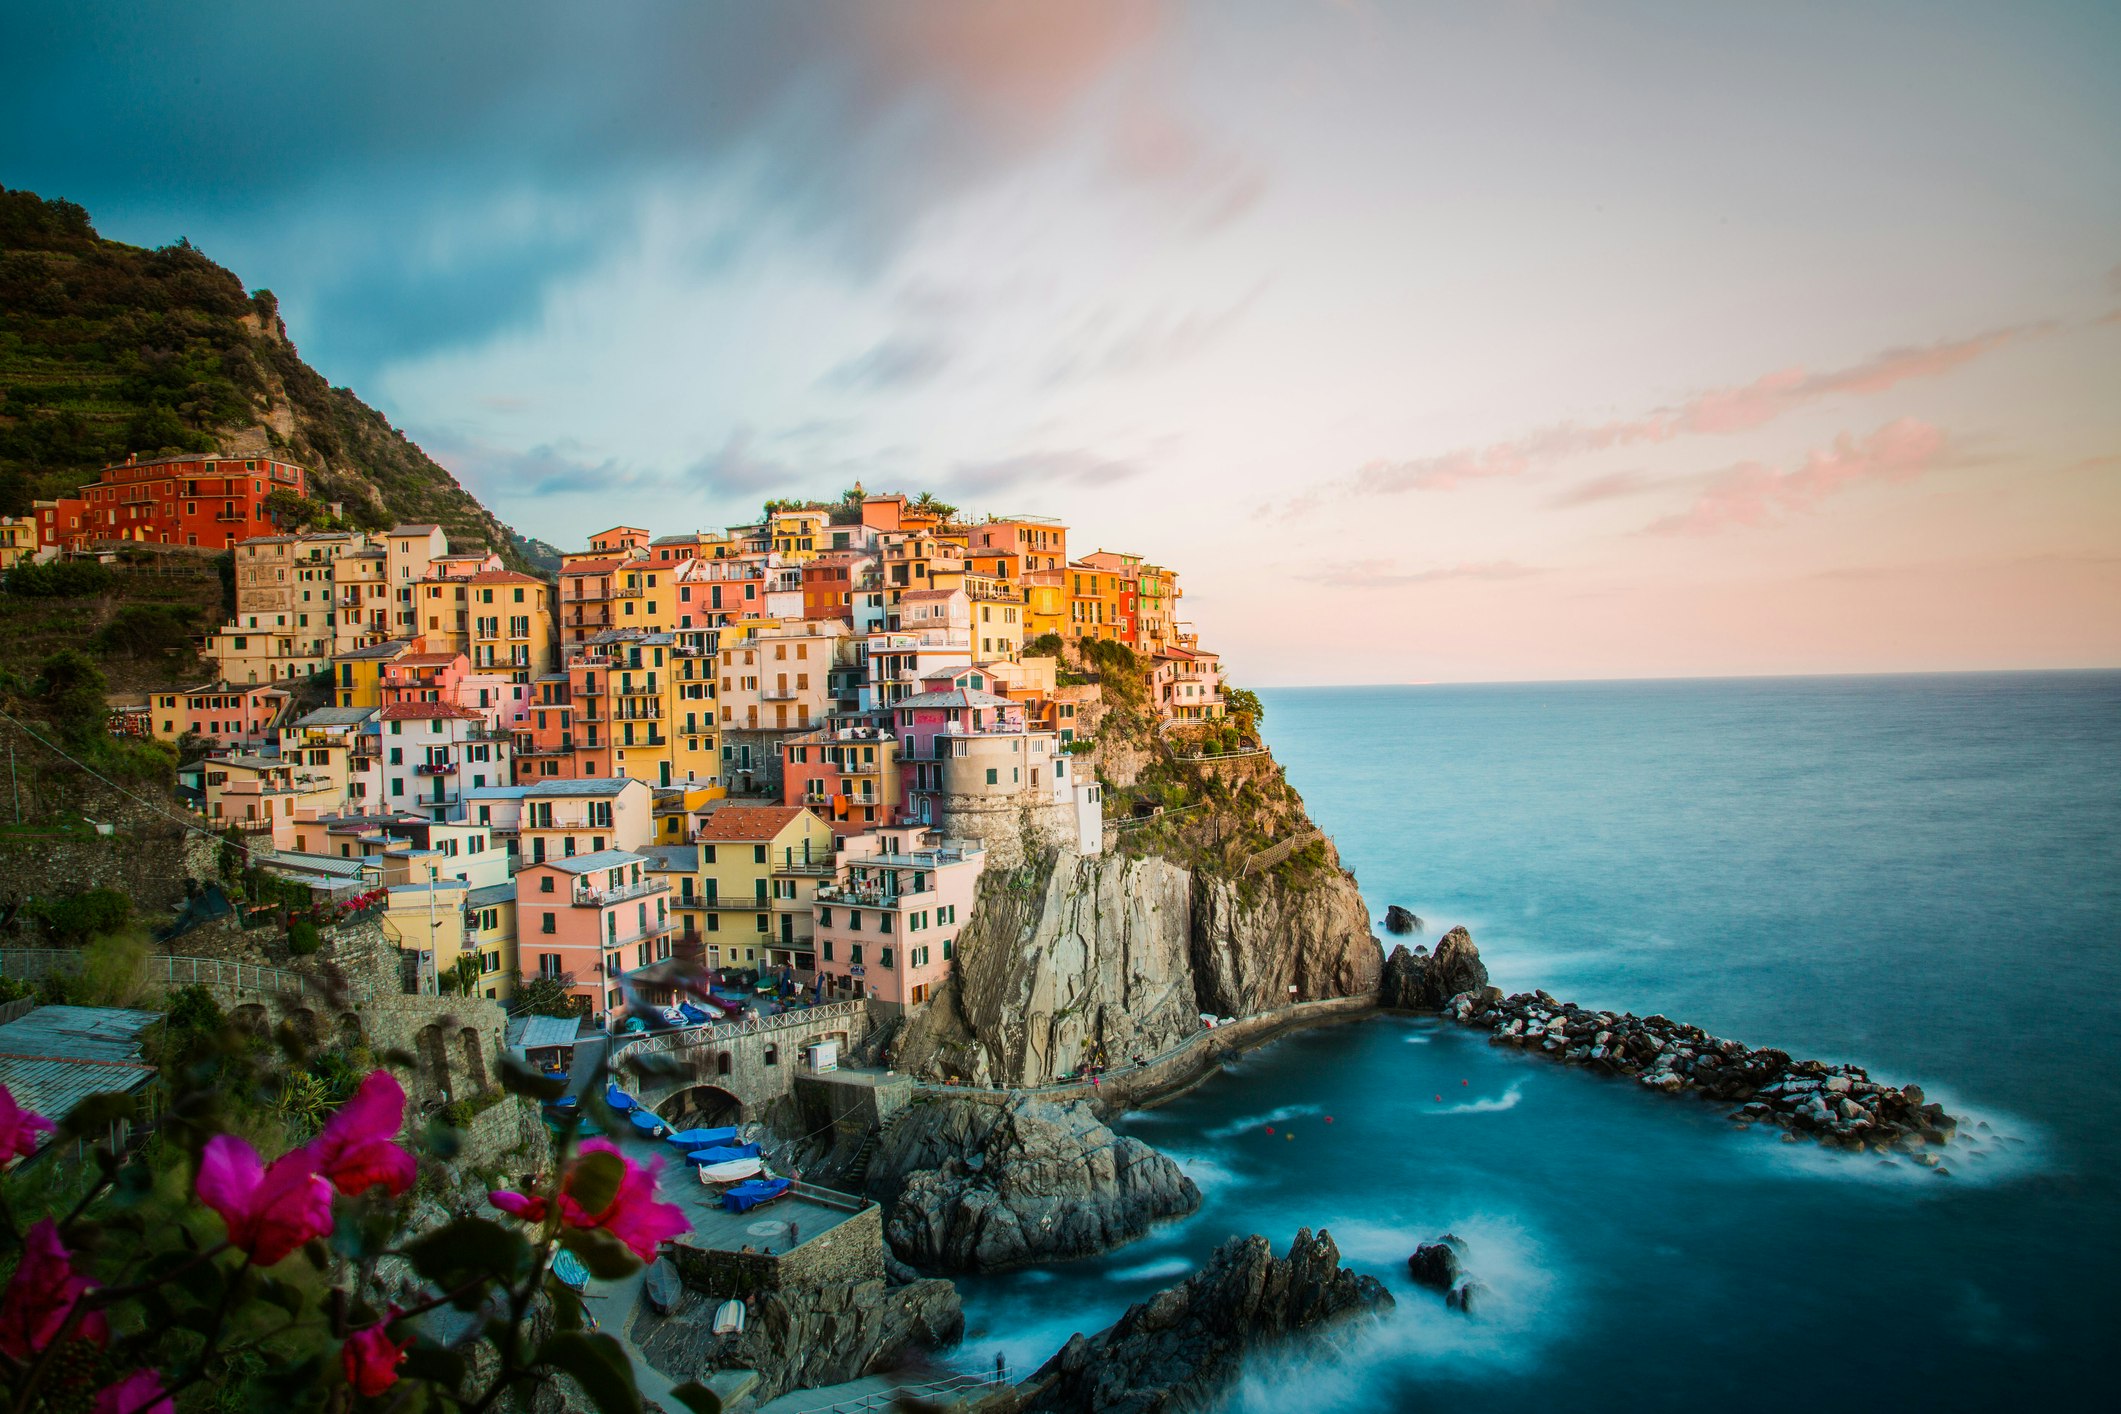 A shot of the town of Monterosso at dusk, lights shining over its coloured houses